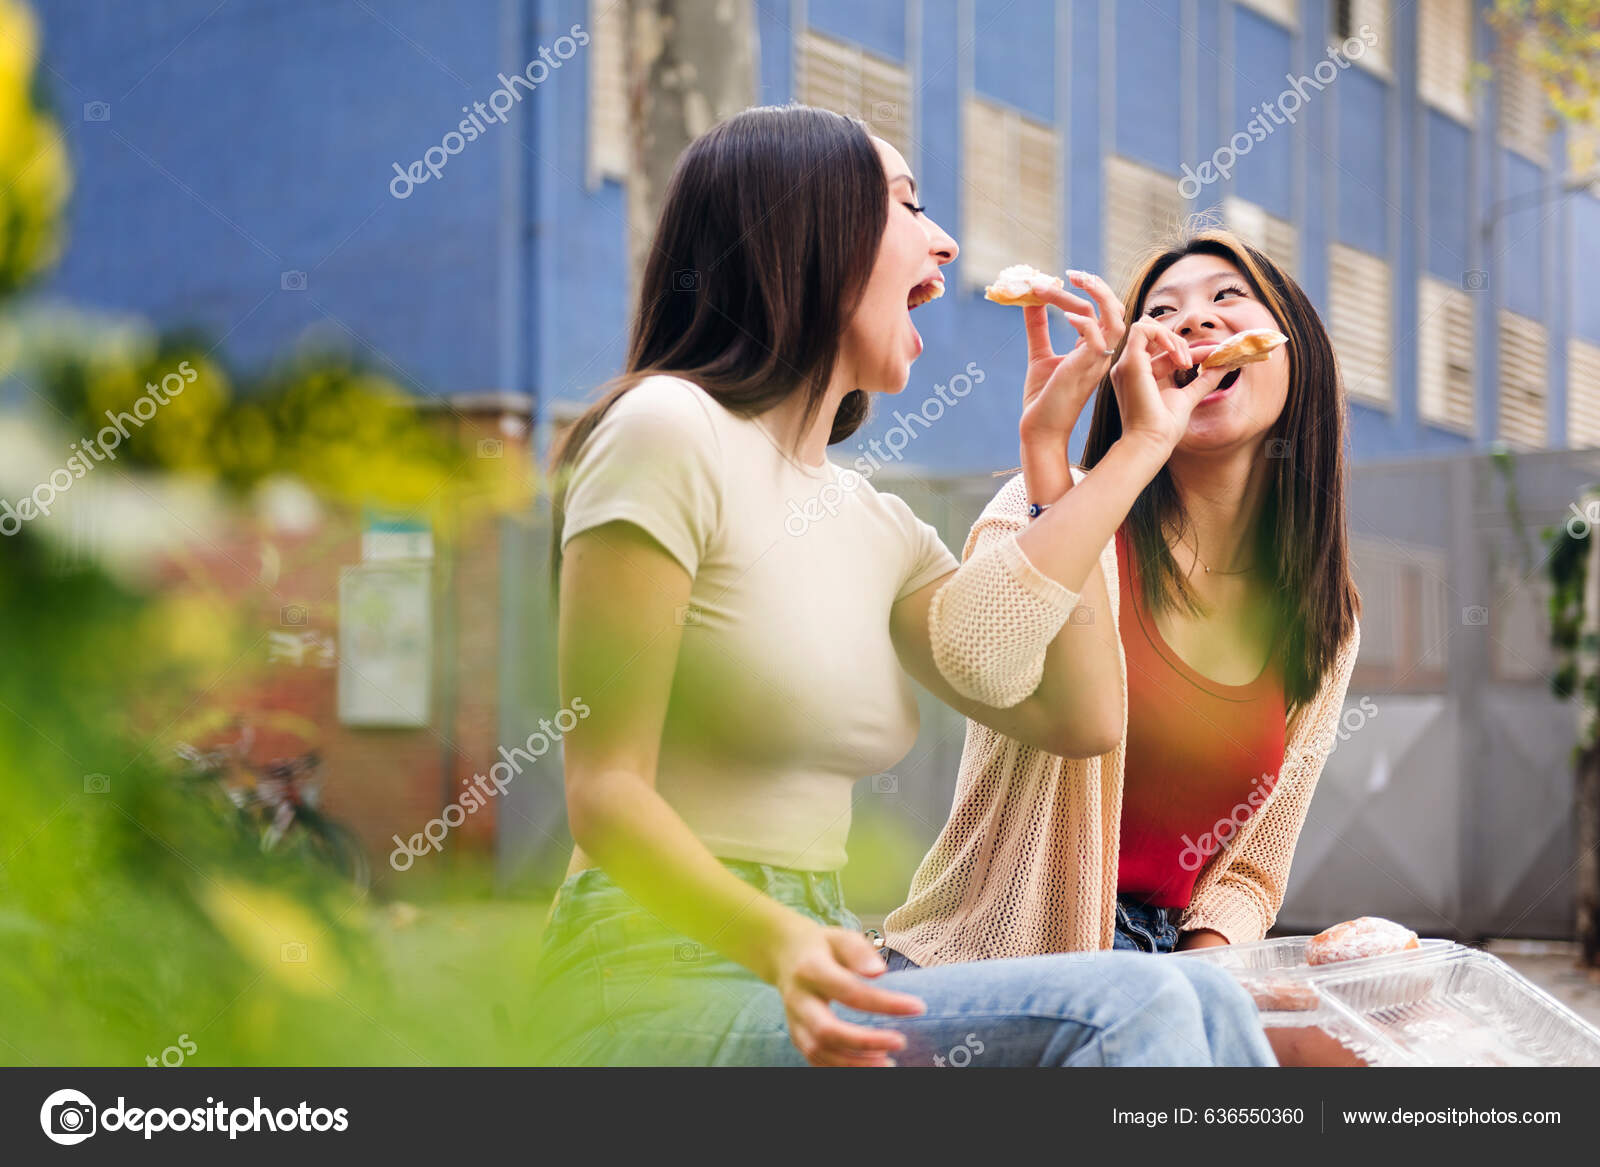 Couple Young Women Sharing Some Sweet Buns Sitting City Park Stock Photo by ©raulmellado 636550360 picture